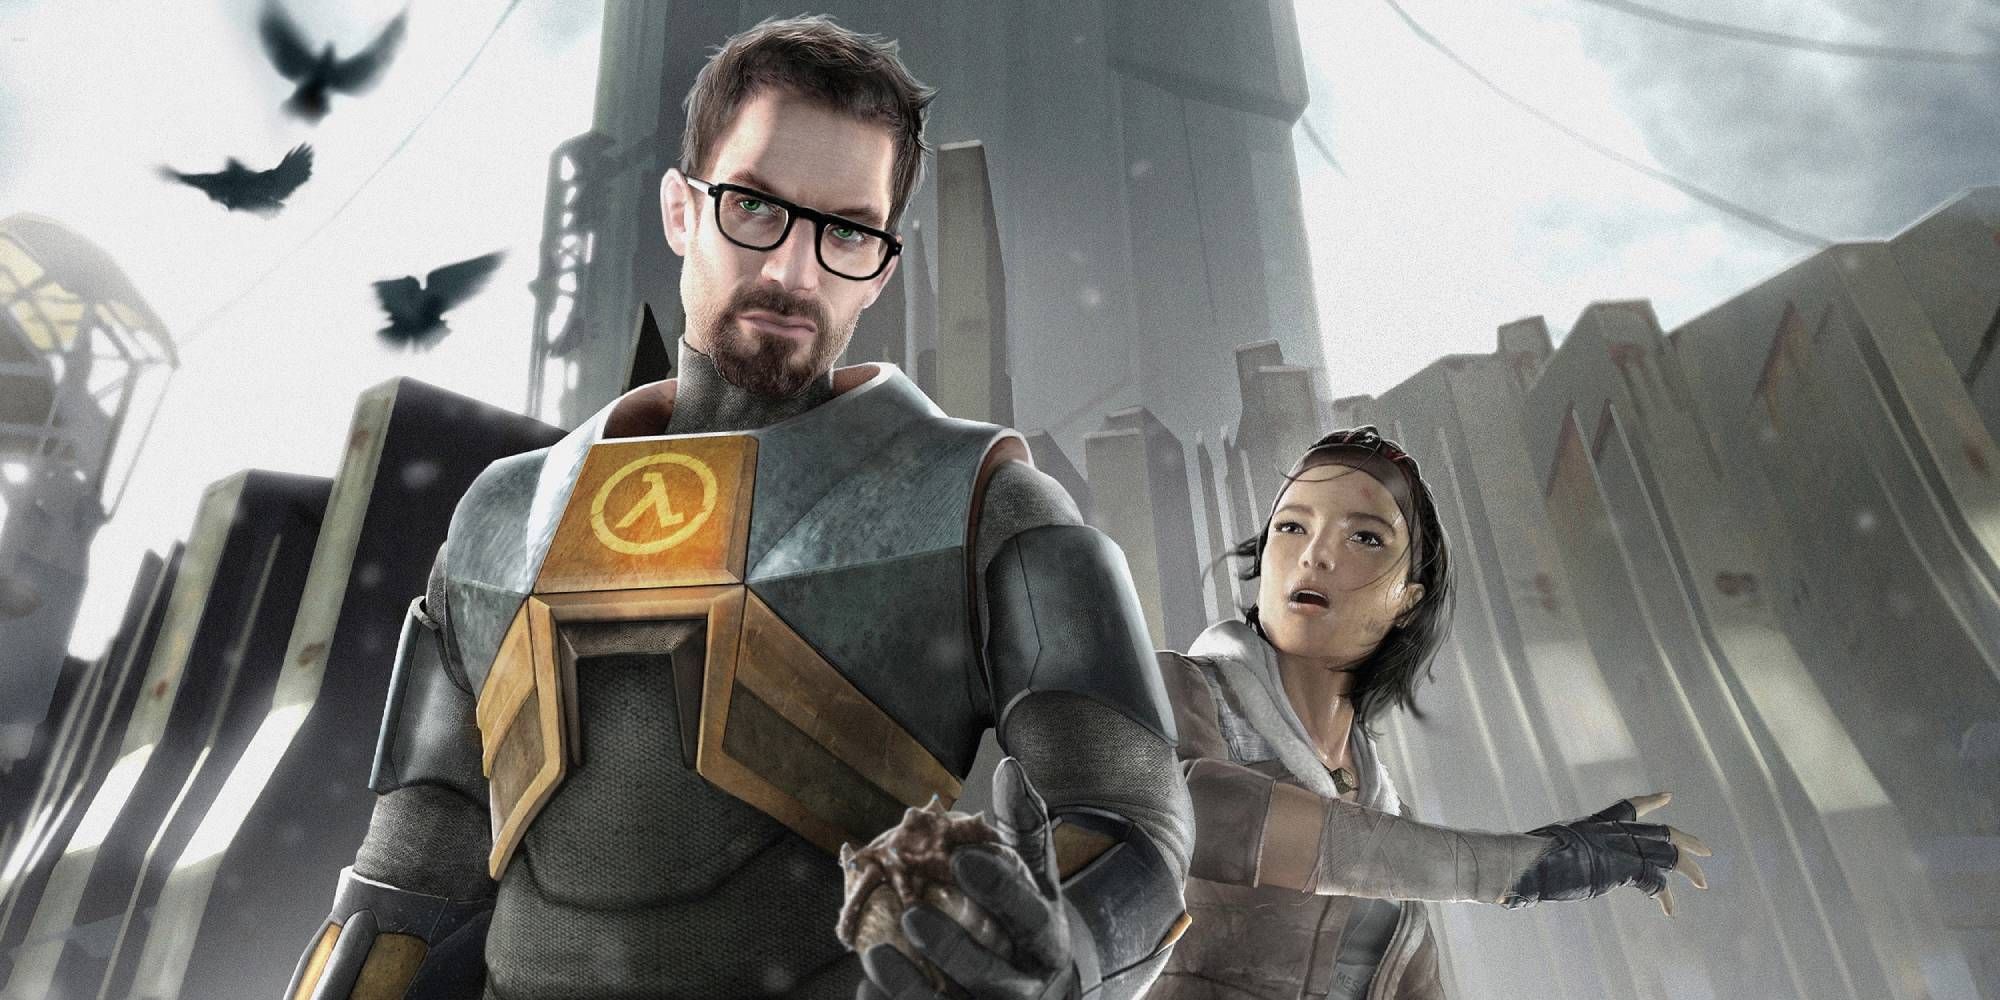 Gordon Freeman posing whilst with Alyx Vance in the Half Life 2 cover art